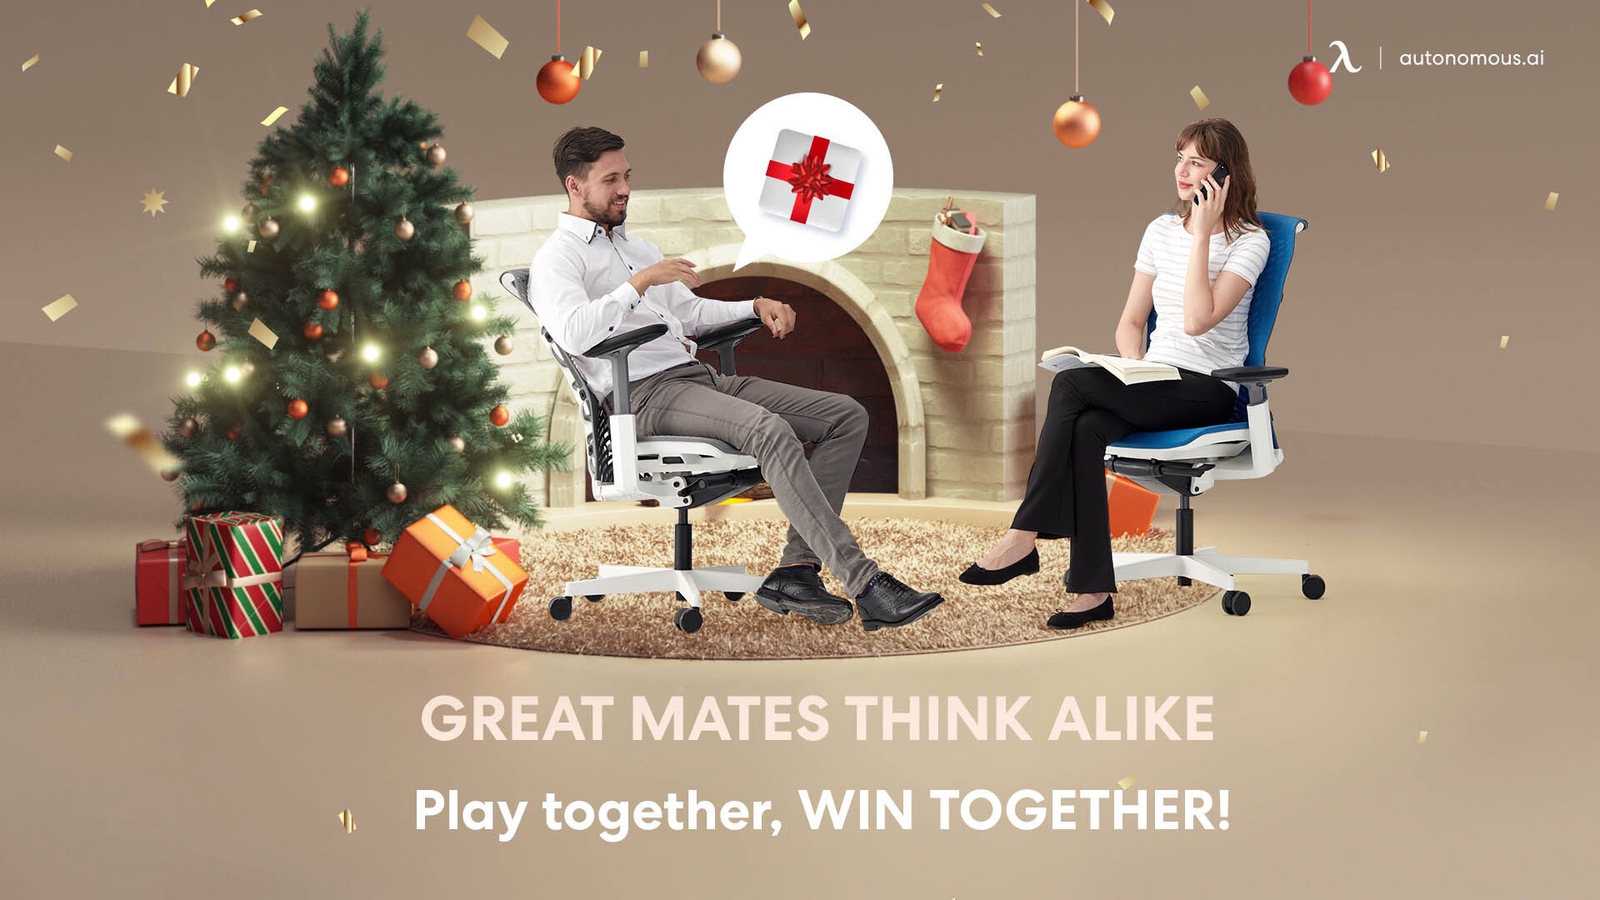 Great Mates Think Alike - Test Your Friendships With Our New Minigame!